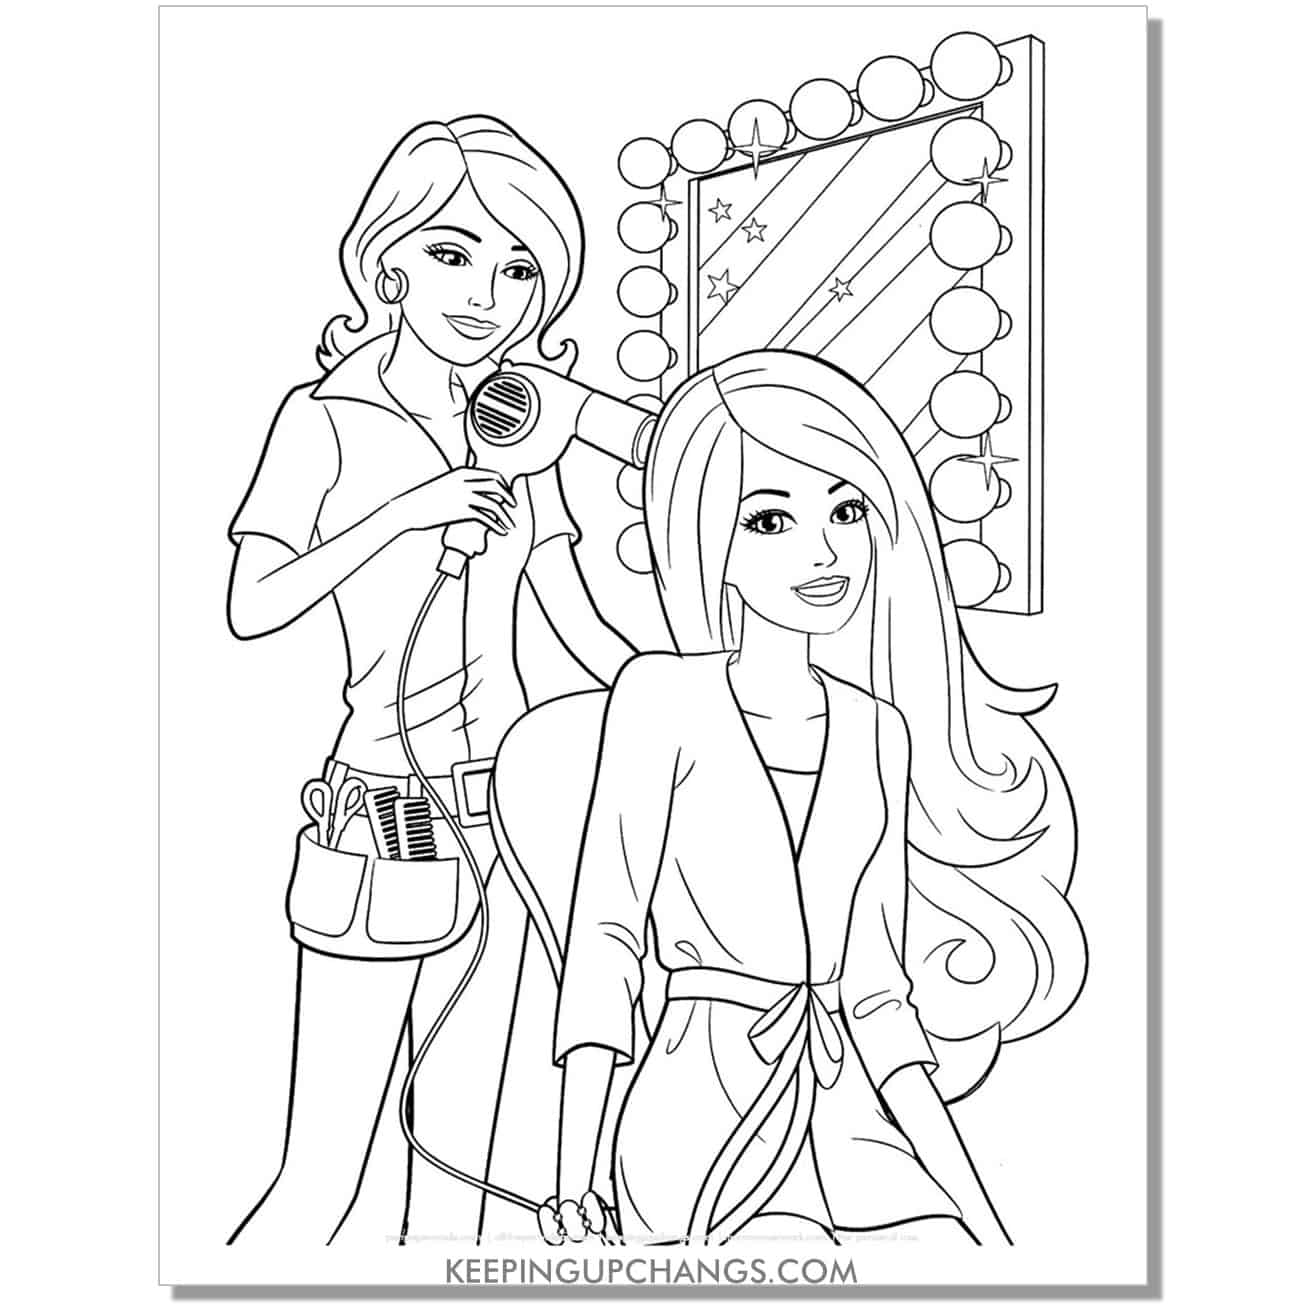 barbie with hairdresser and make up artist backstage coloring page.